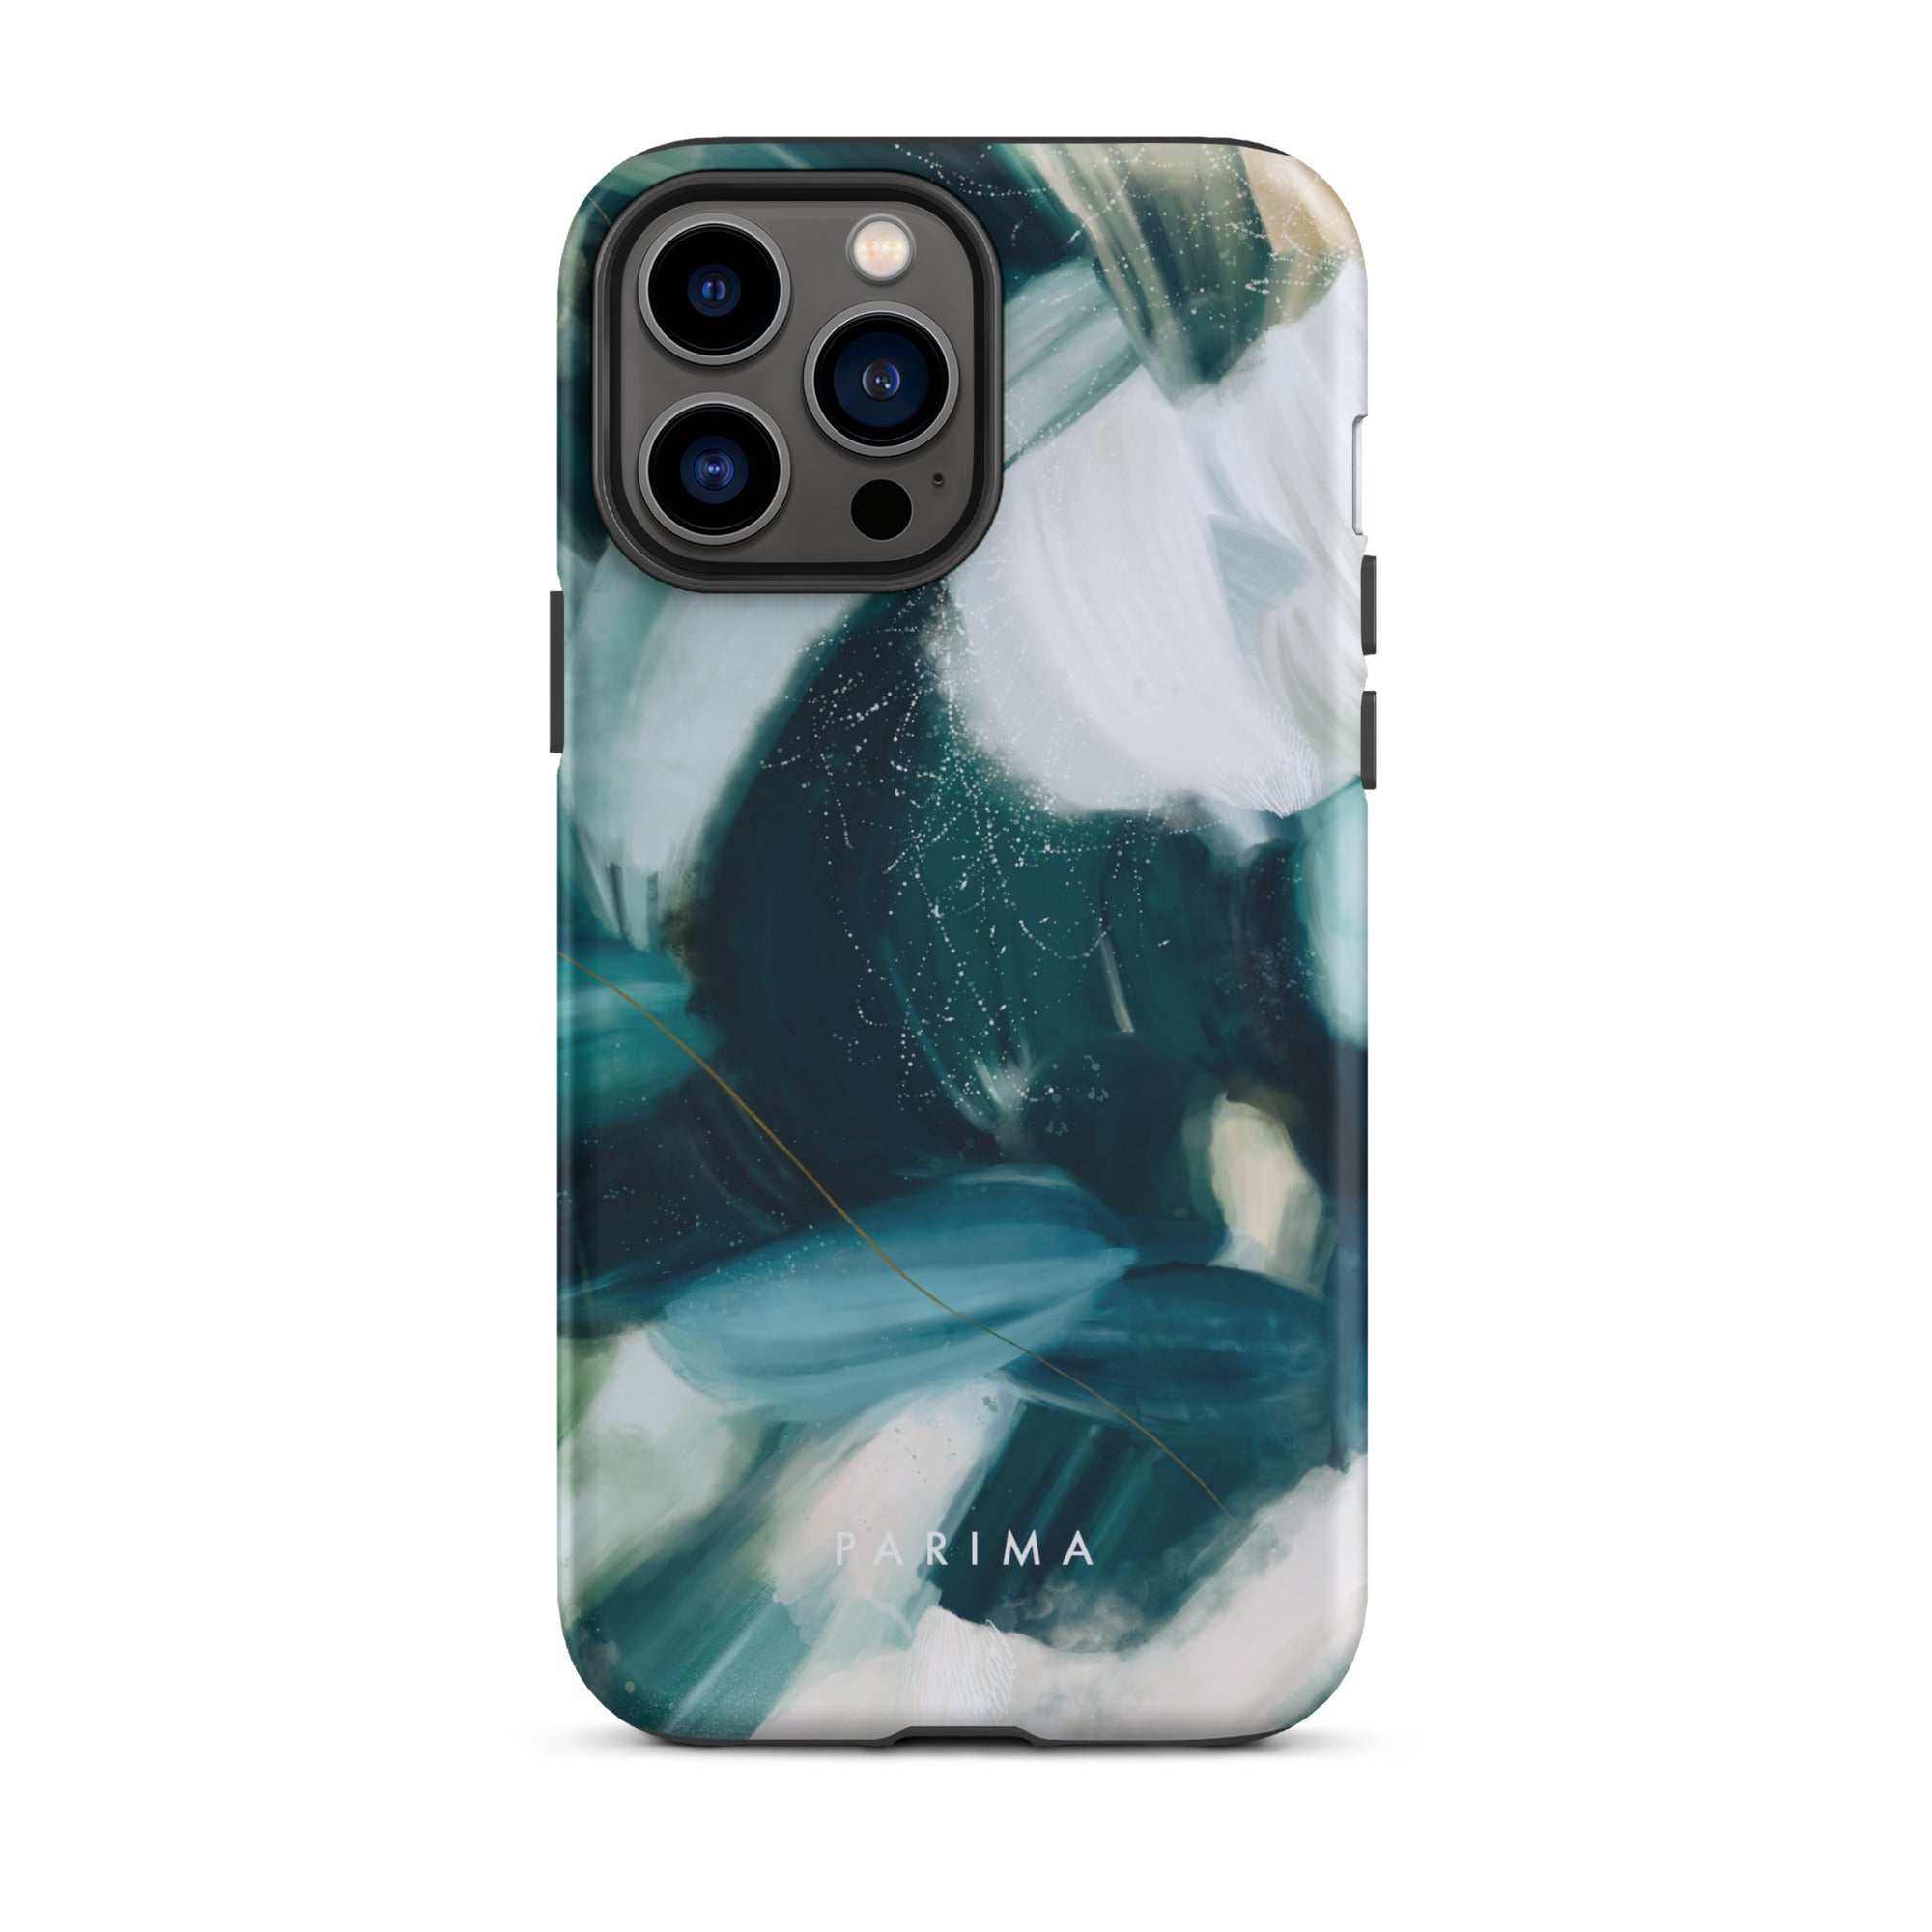 Caspian, green and blue abstract art - iPhone 13 Pro Max tough case by Parima Studio